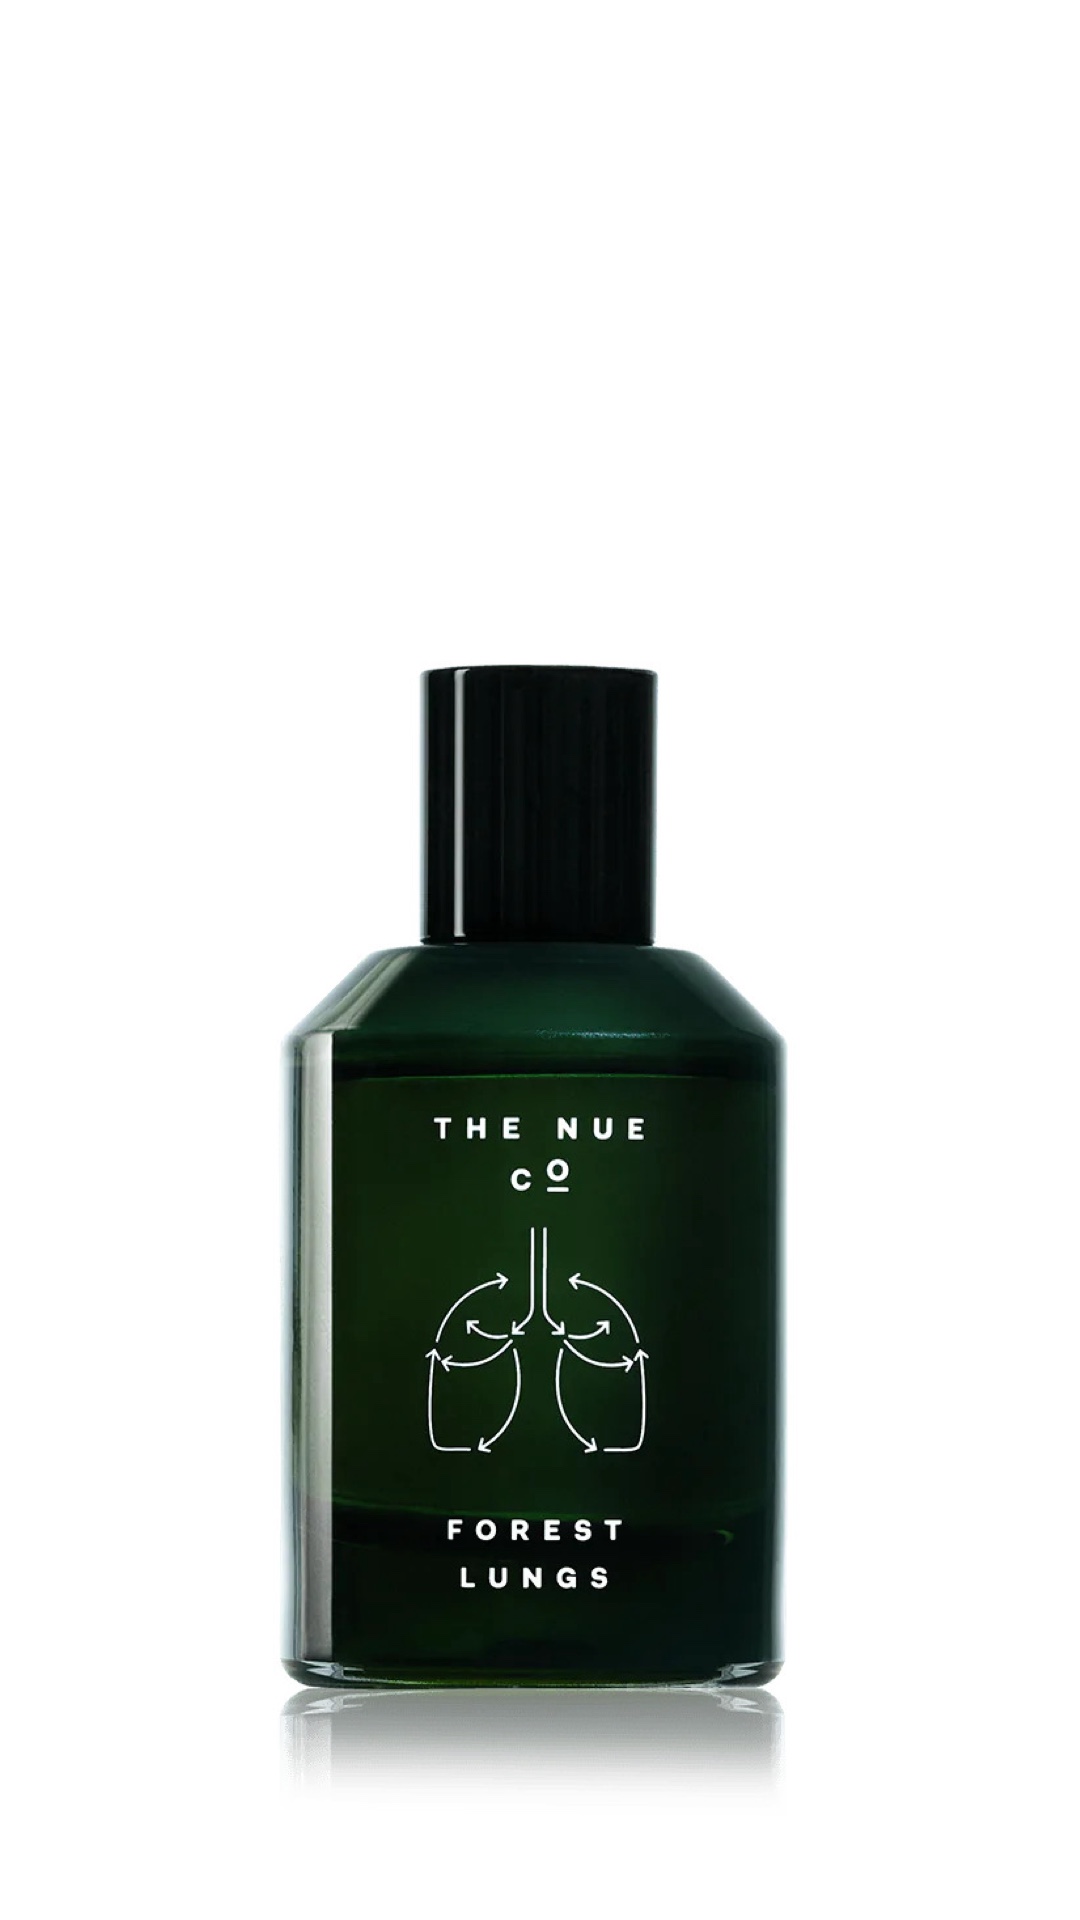 The Nue Co. Clean Perfume